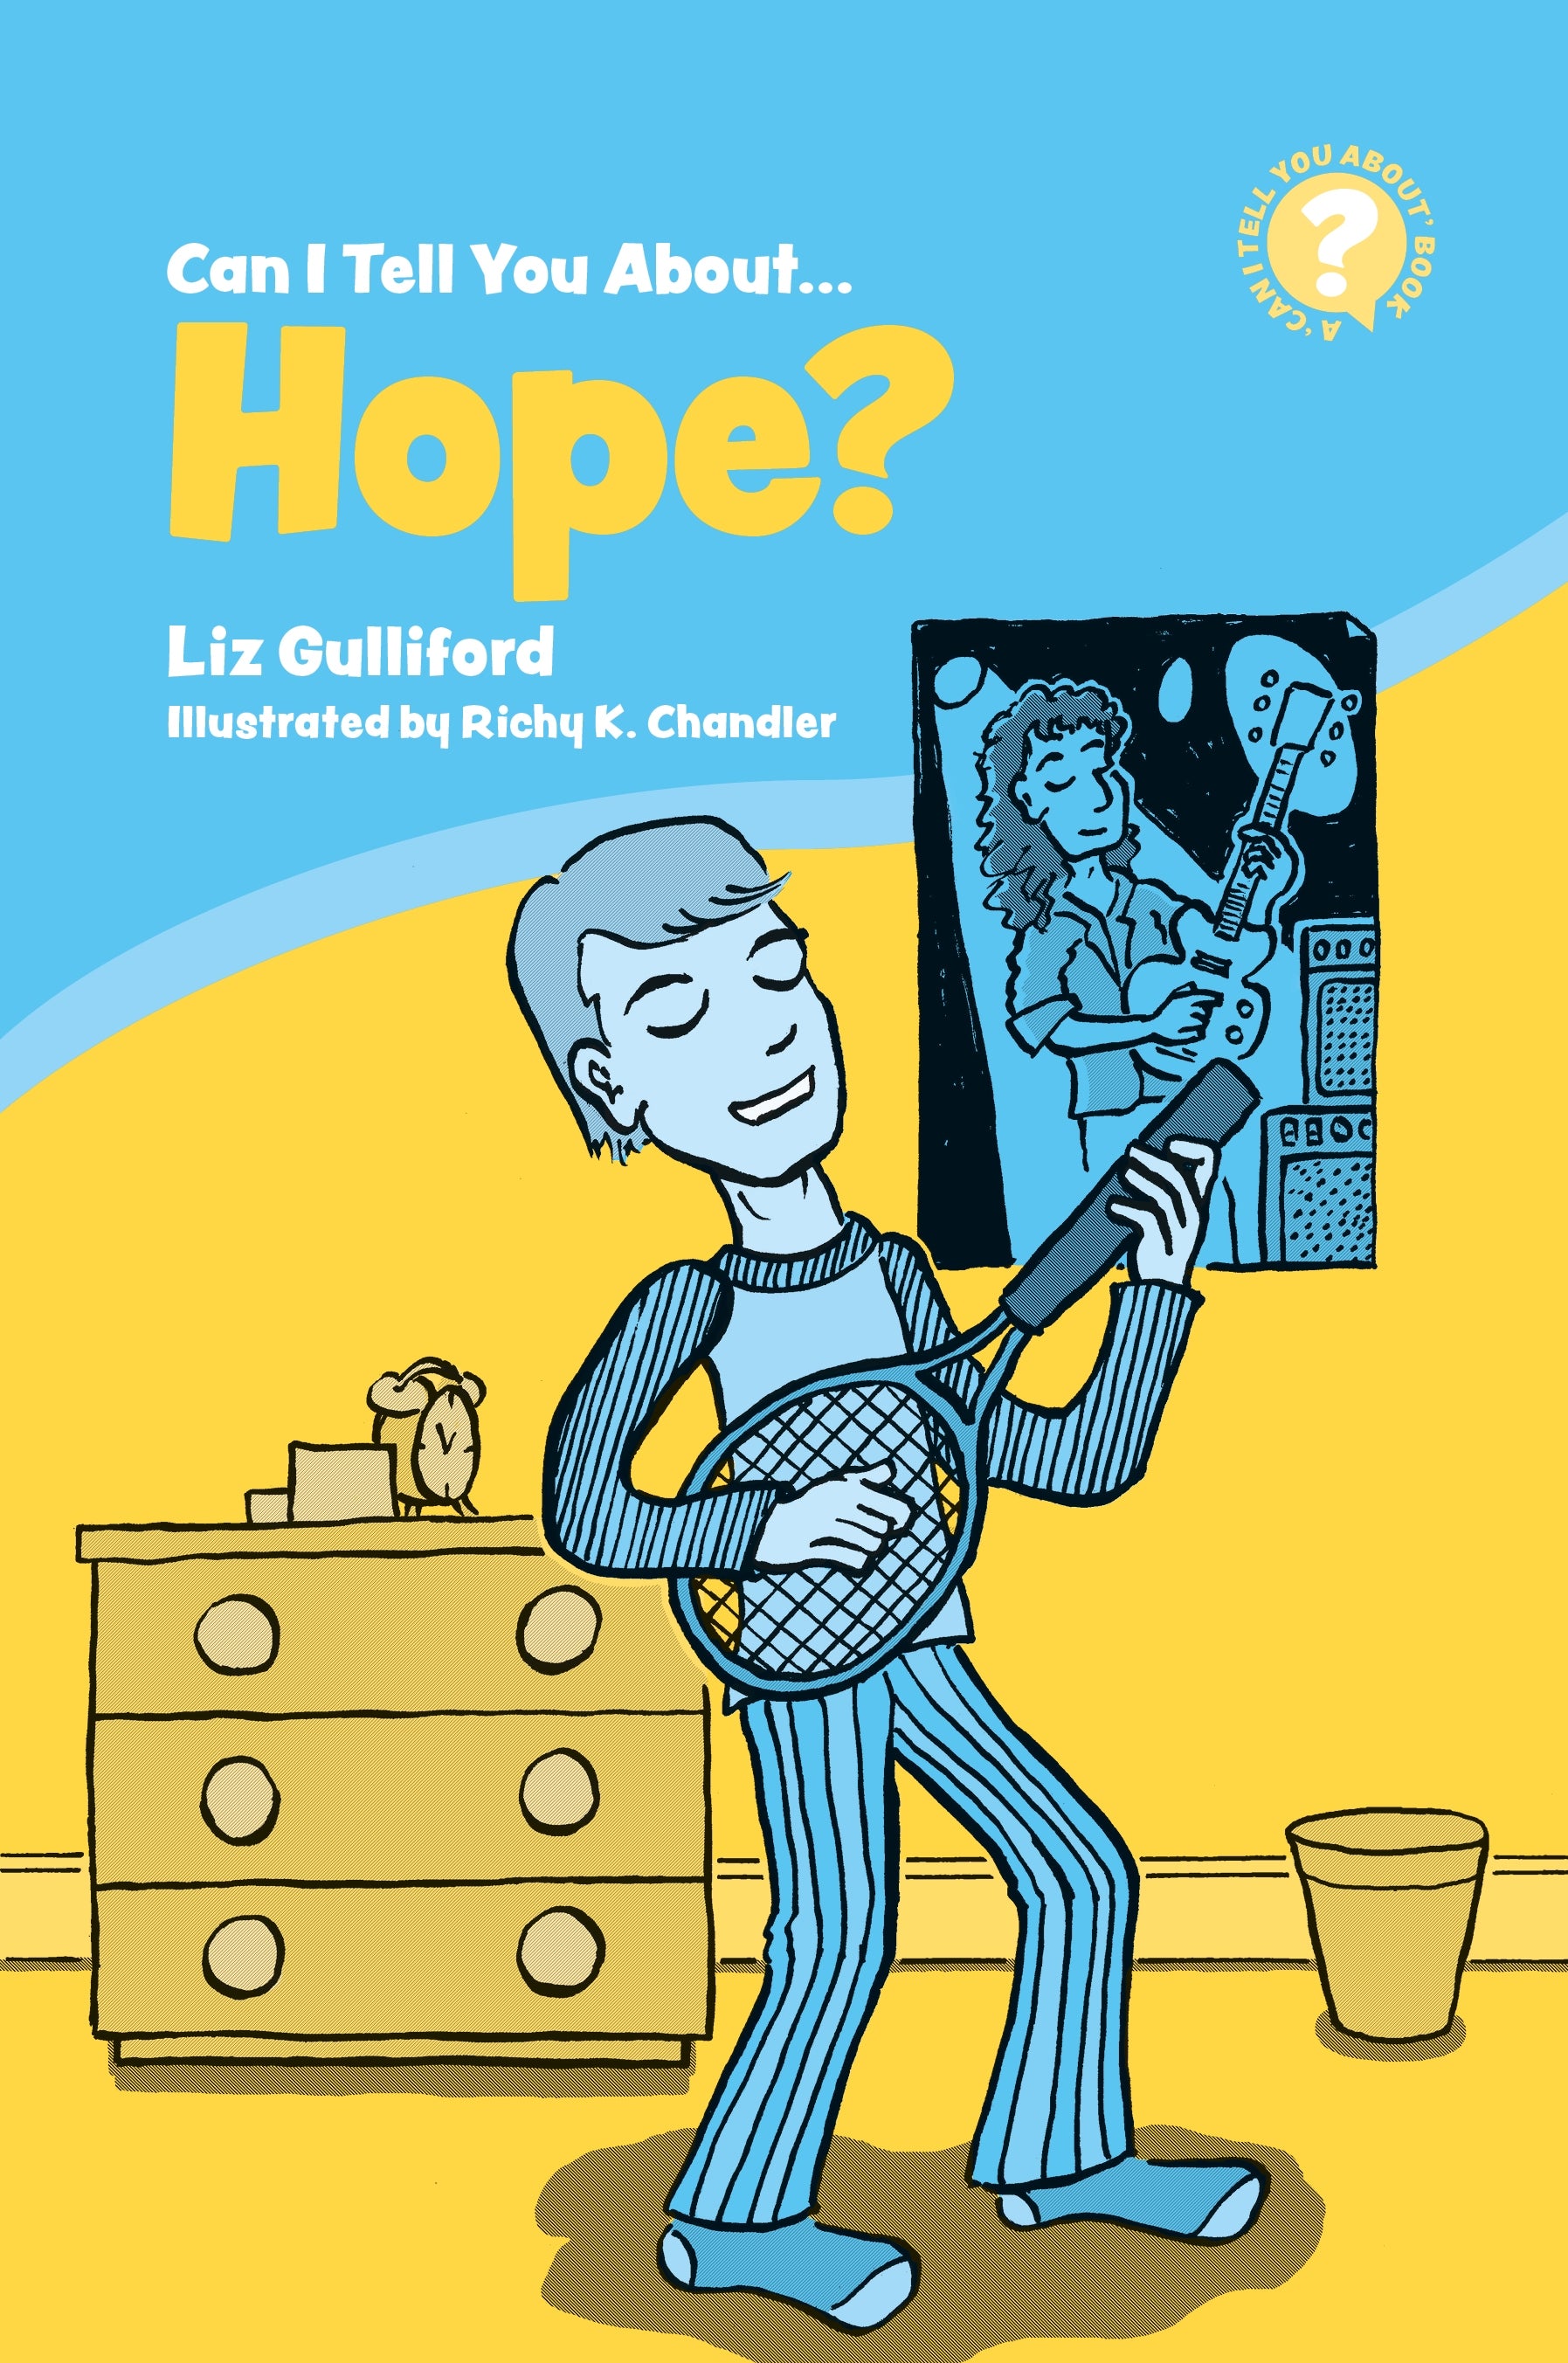 Can I Tell You About Hope? by Richy K. Chandler, Liz Gulliford